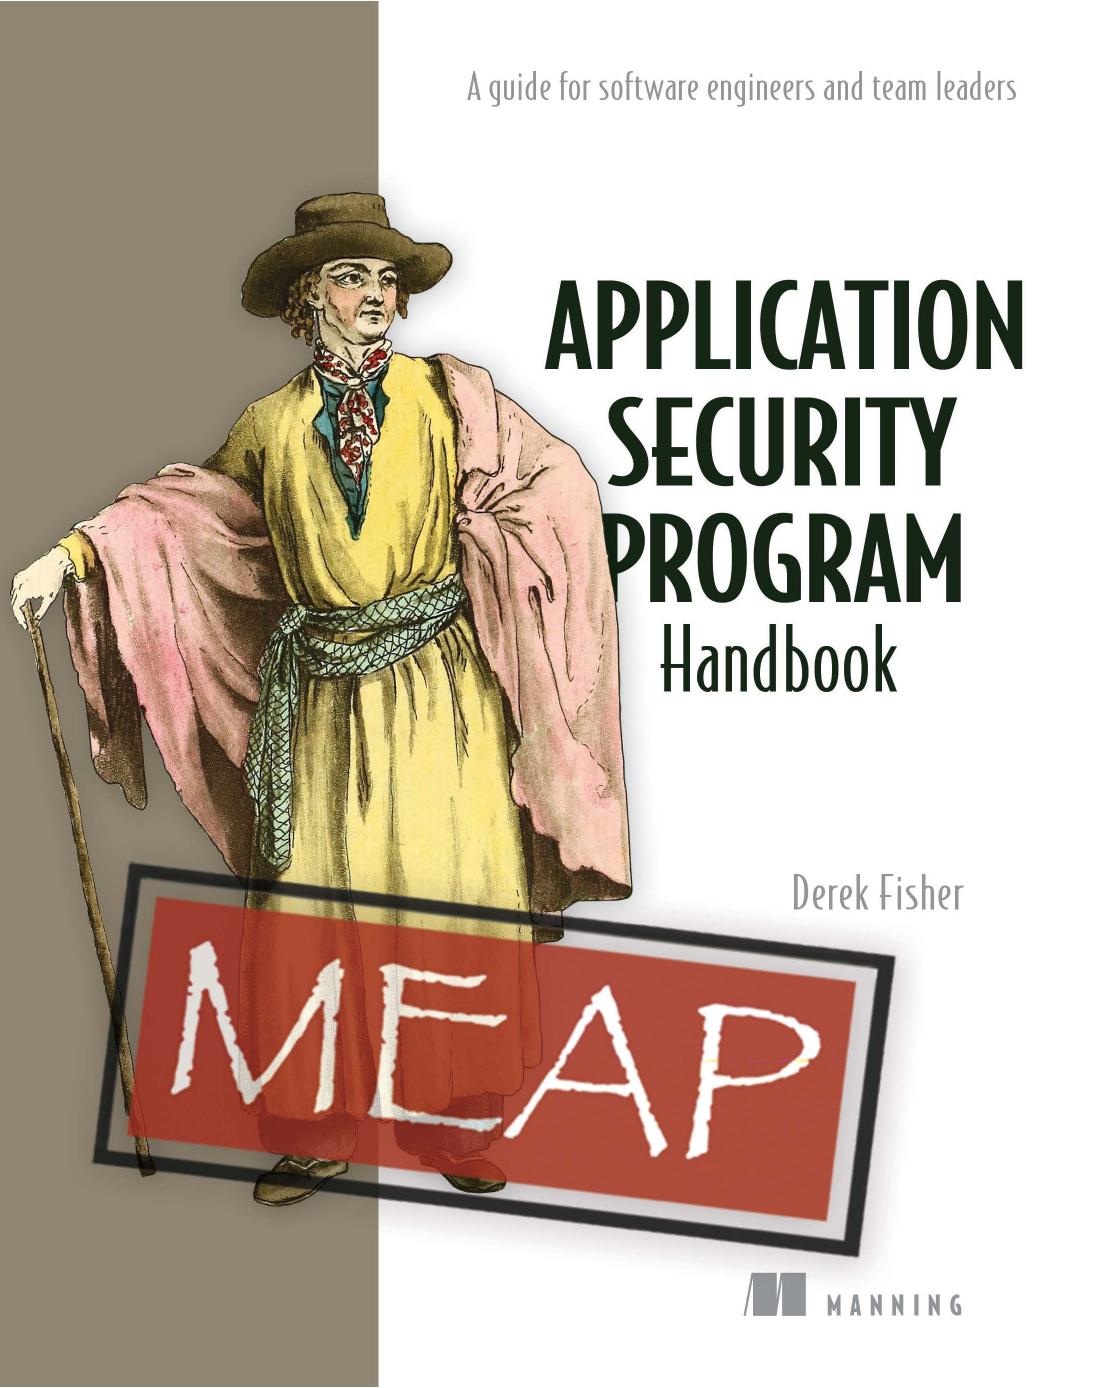 Application Security Program Handbook: A Guide for Software Engineers and Team Leaders